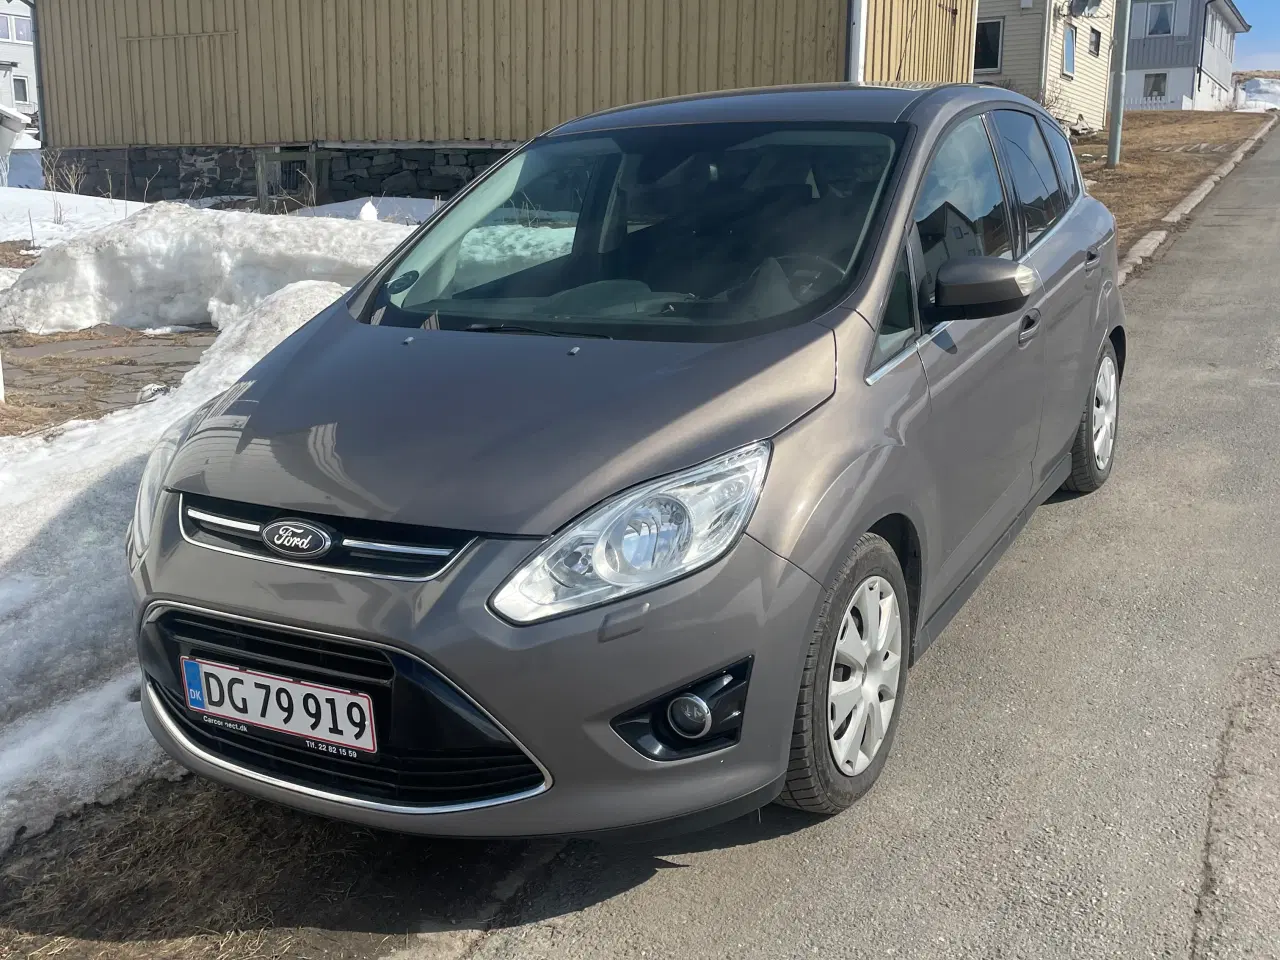 Billede 5 - ford c-max 2.0 automat